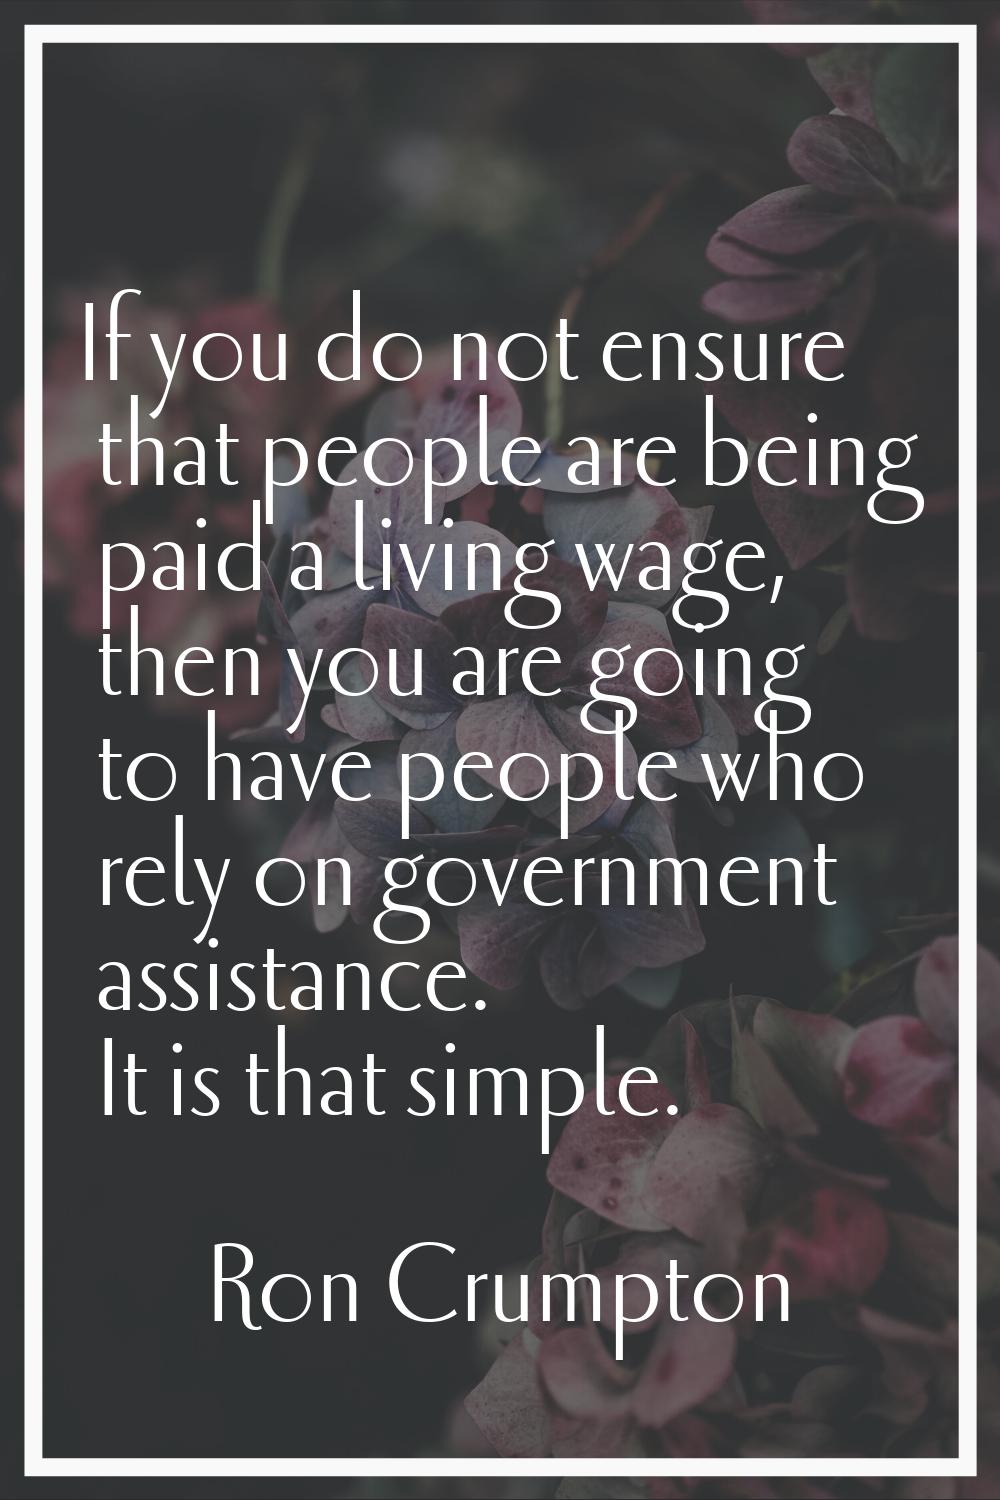 If you do not ensure that people are being paid a living wage, then you are going to have people wh